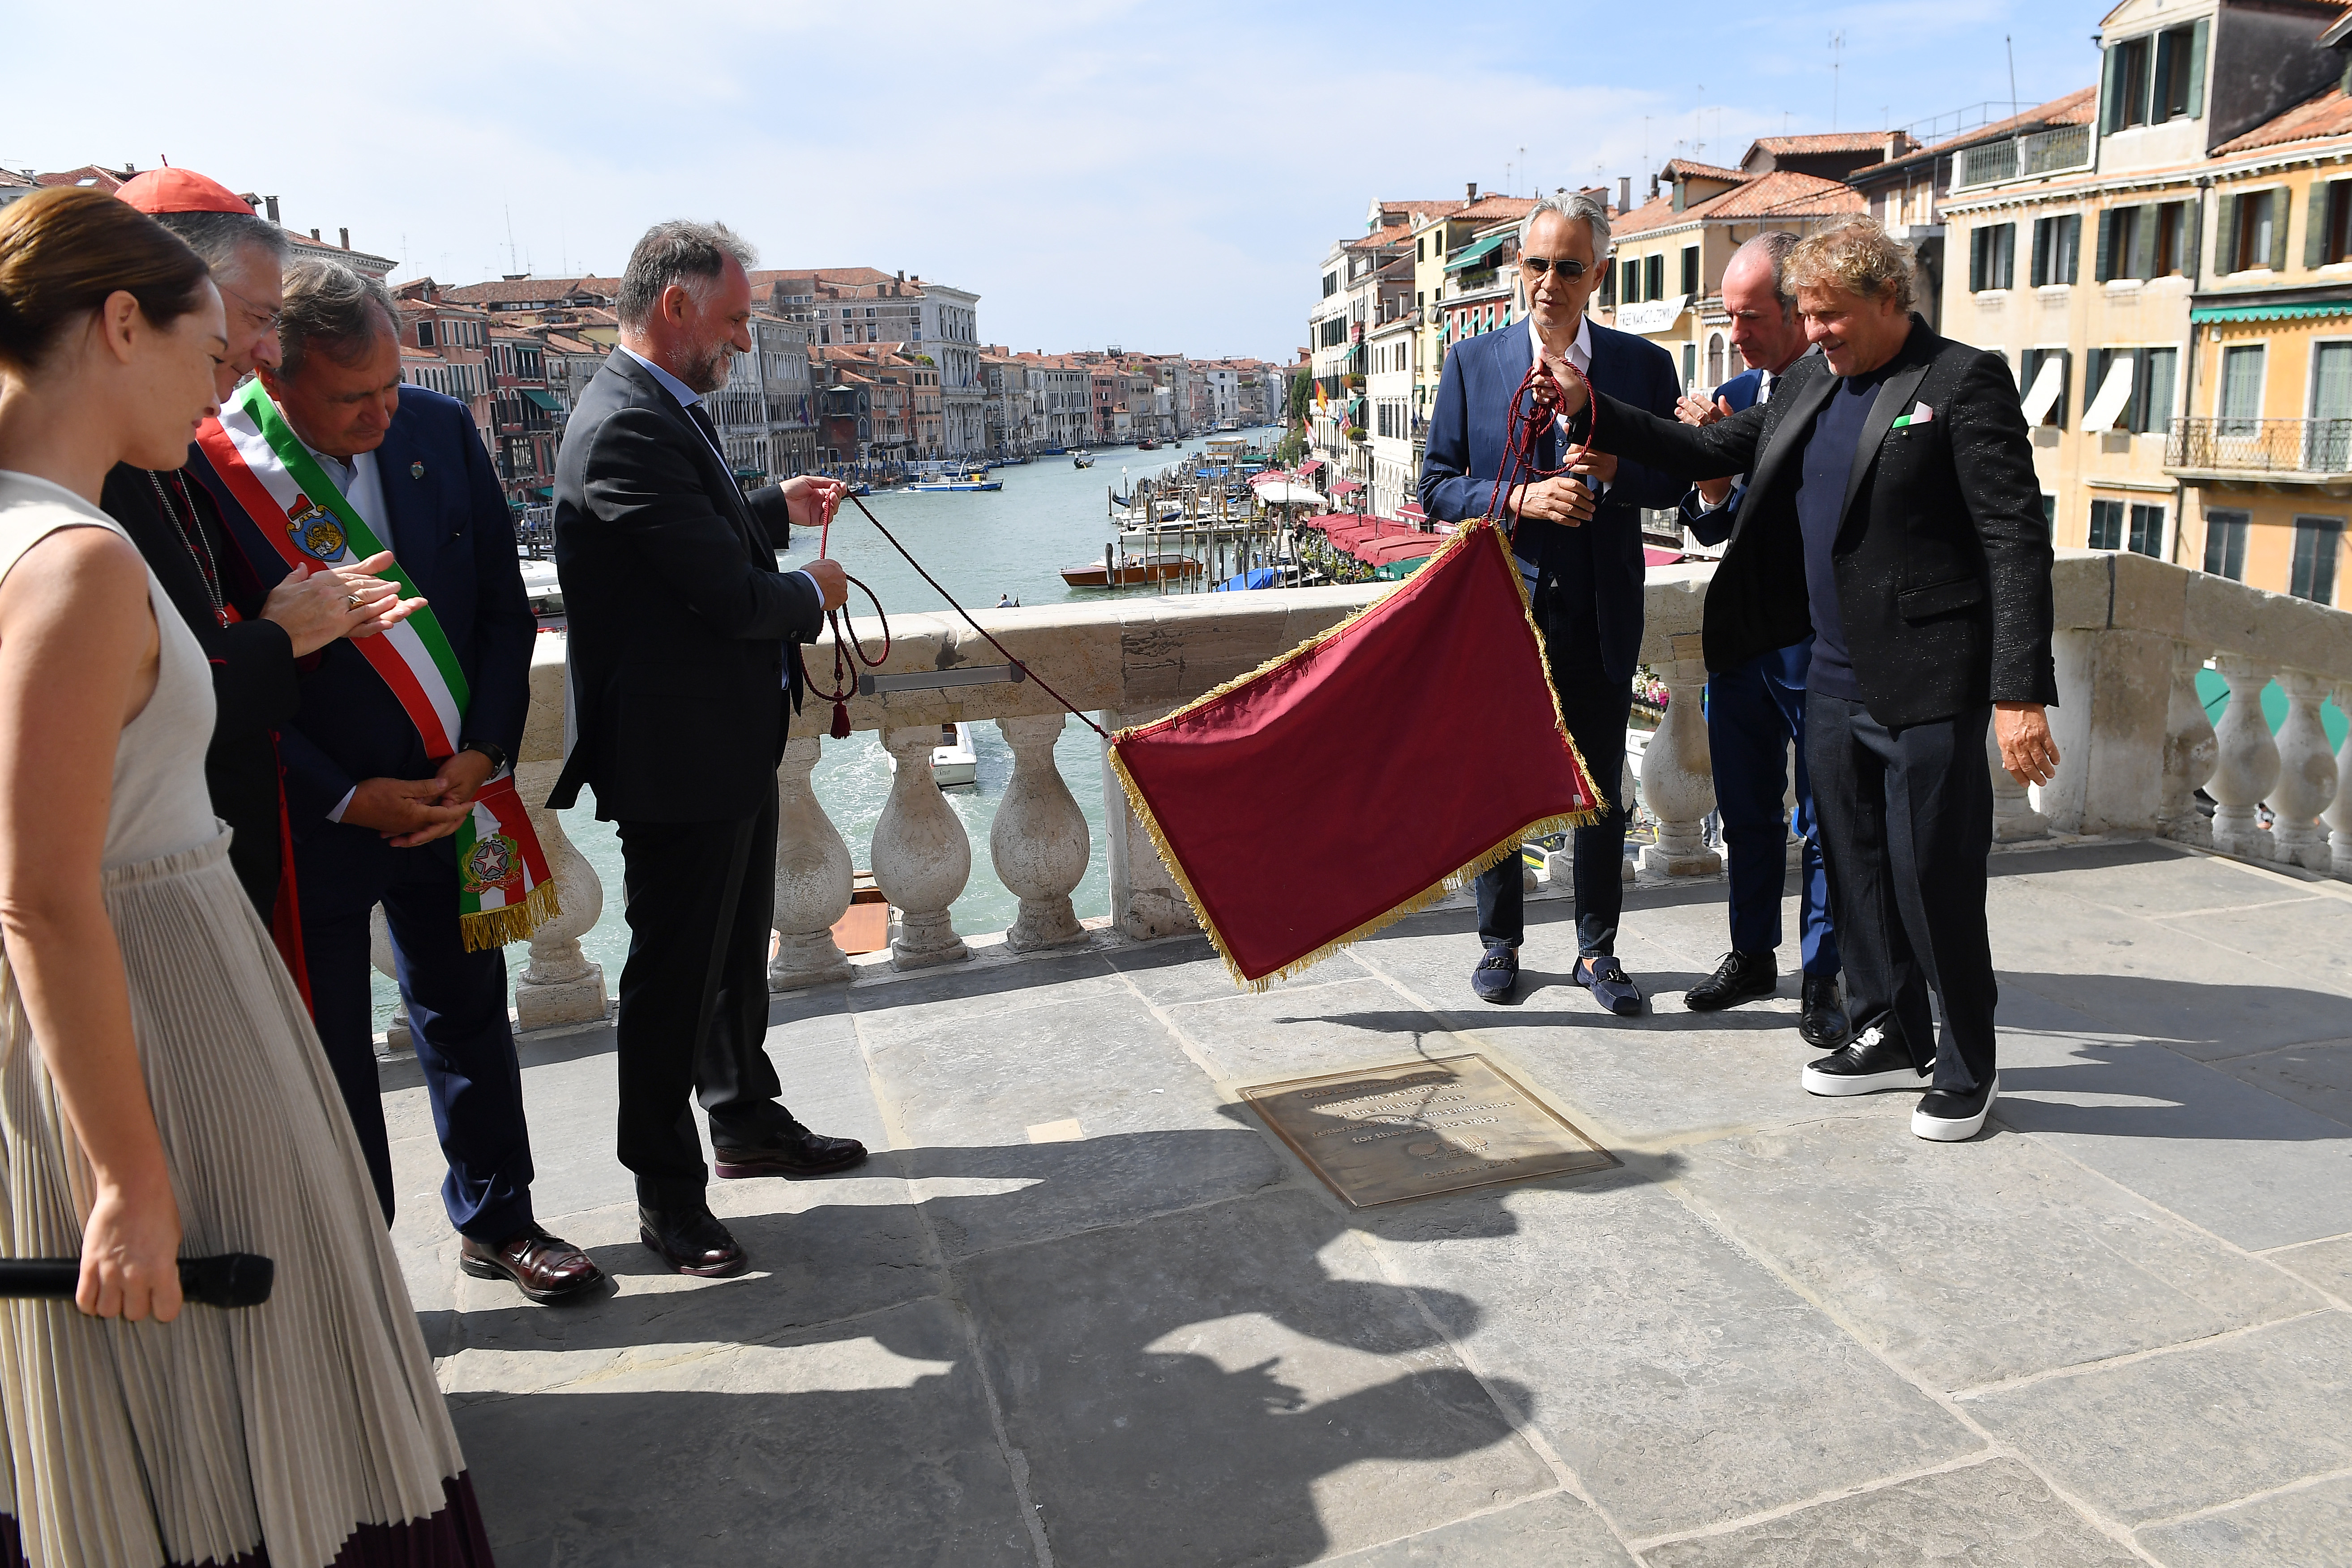 VENICE, ITALY - SEPTEMBER 07: attend the Inauguration of Rialto Bridge after OTB Restoration Works on September 07, 2021 in Venice, Italy. (Photo by Jacopo M. Raule/Getty Images for OTB)